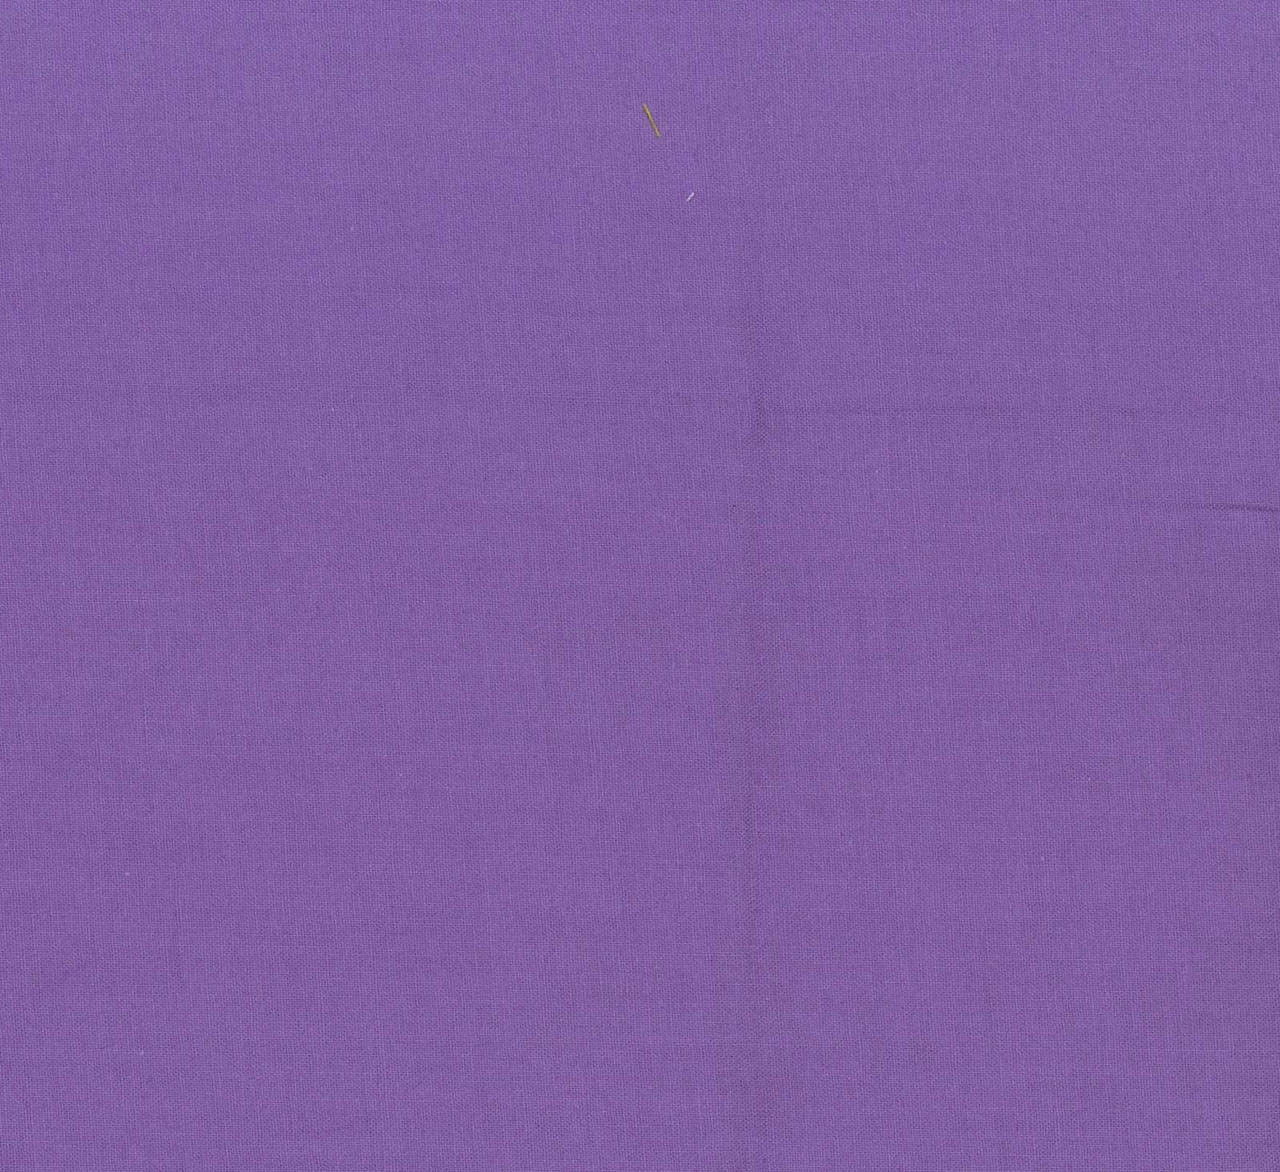 Hyacinth - Oasis Solids - Fabric - 100% Cotton
44/45″ wide
100% US Grown Cotton